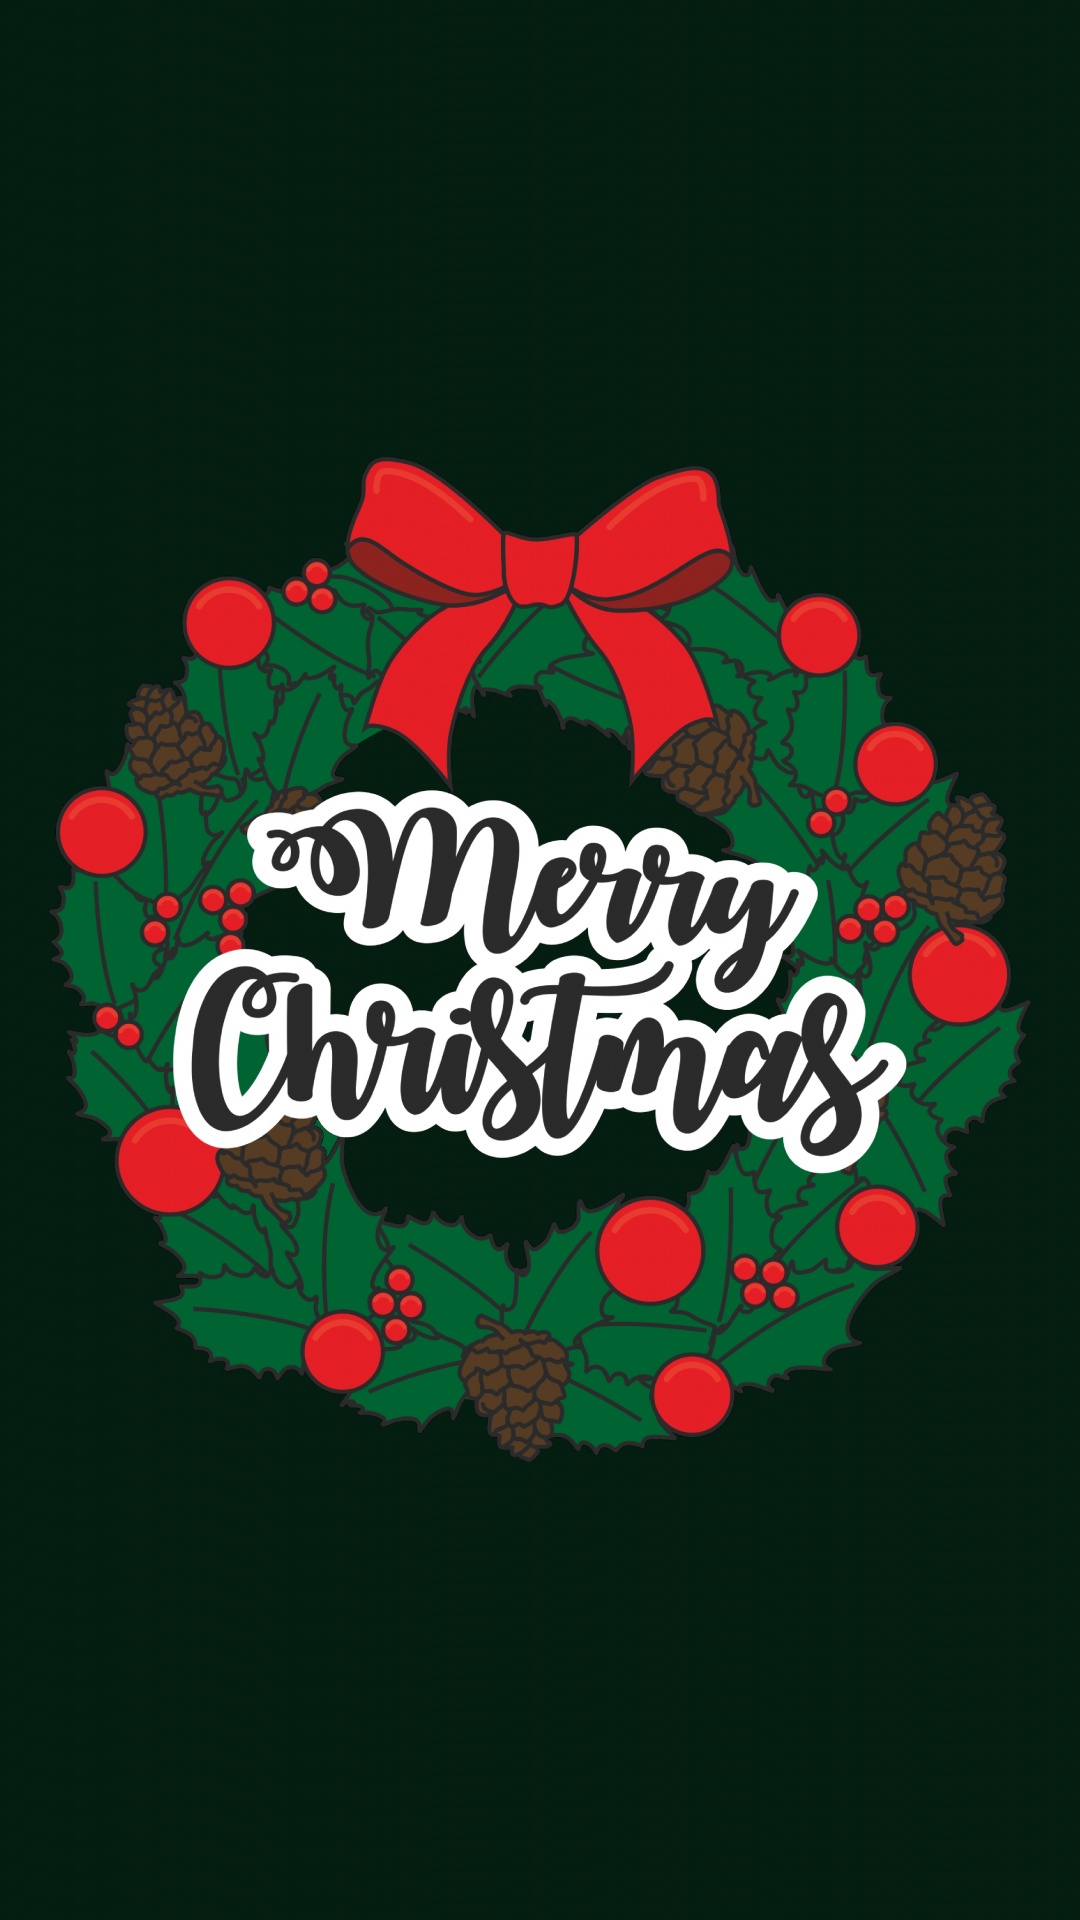 Christmas Day, Holiday, New Year, Logo, Illustration. Wallpaper in 1080x1920 Resolution